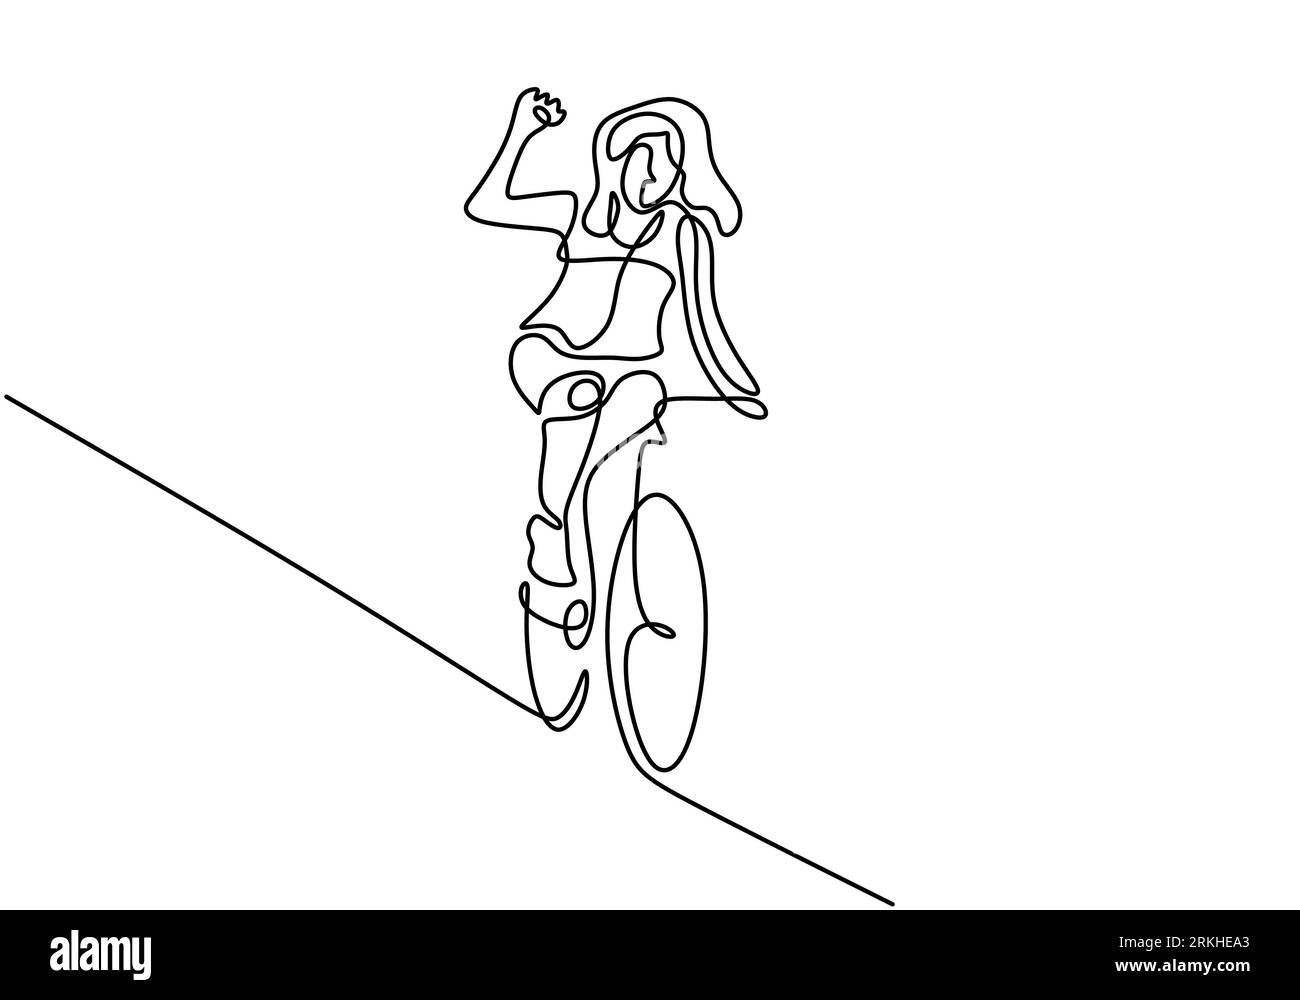 Single continuous line drawing man bicycle racer improve his speed